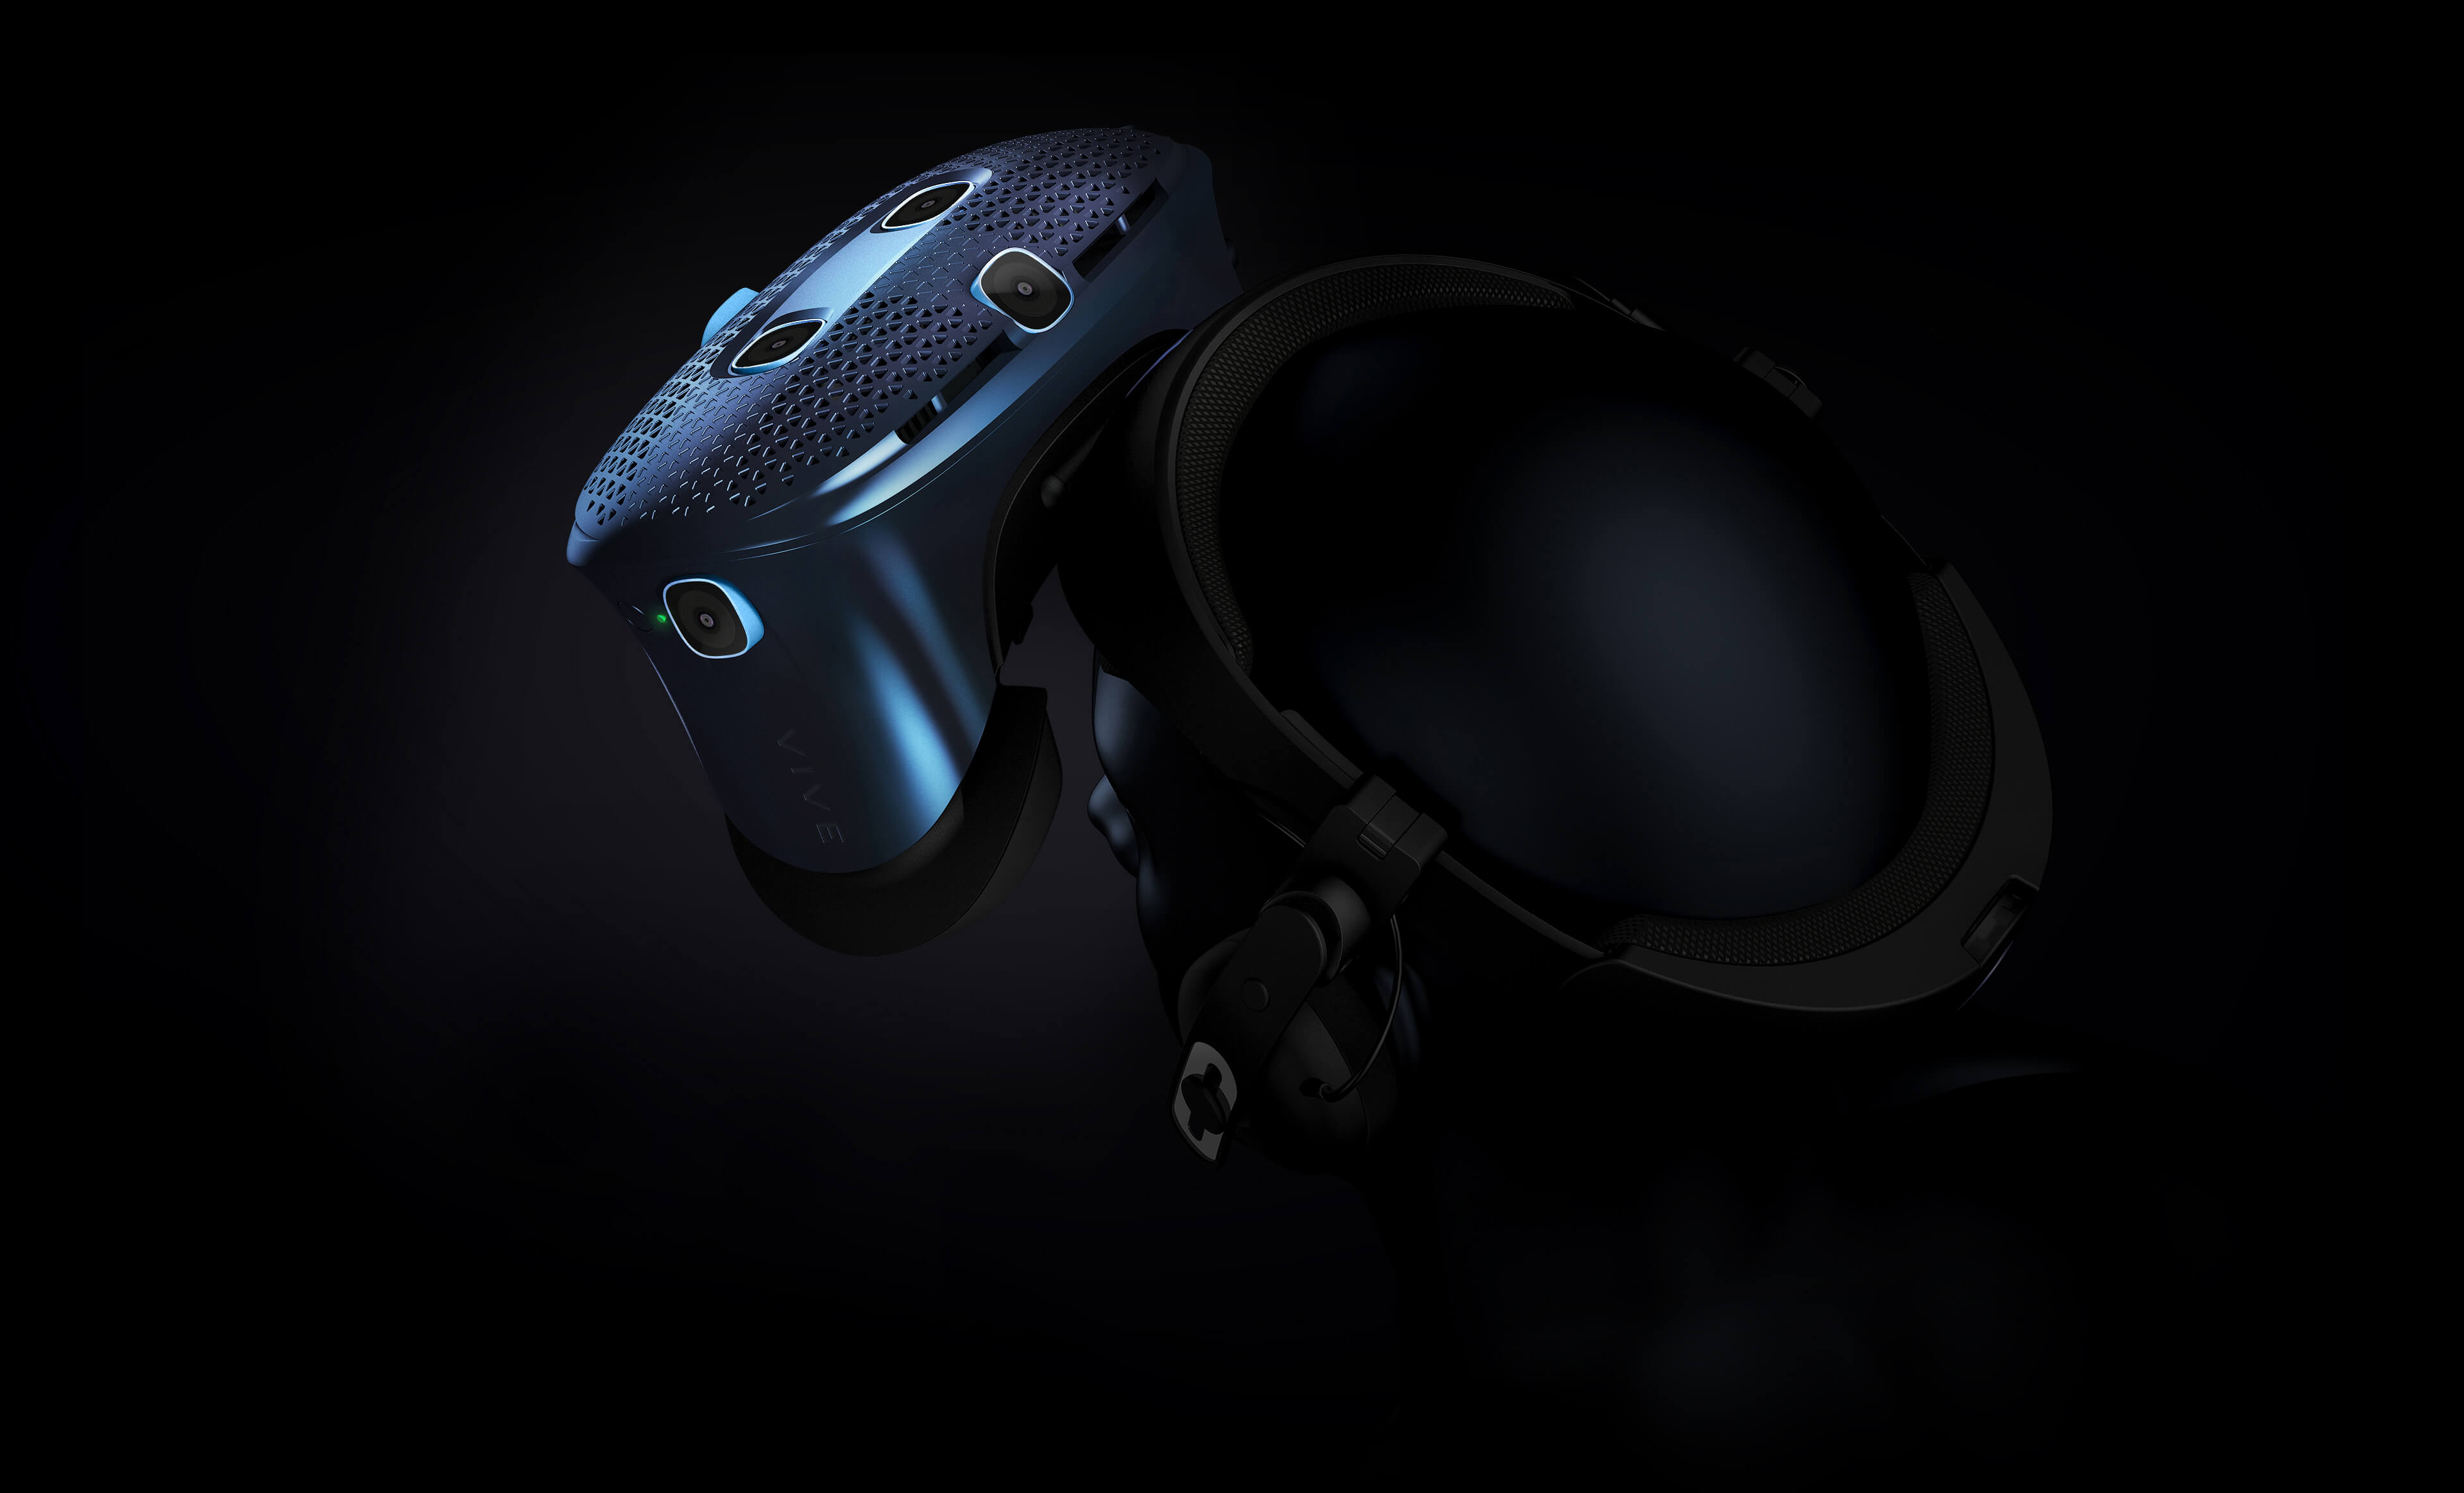 detail of the HTC VR headset's Flip-up design